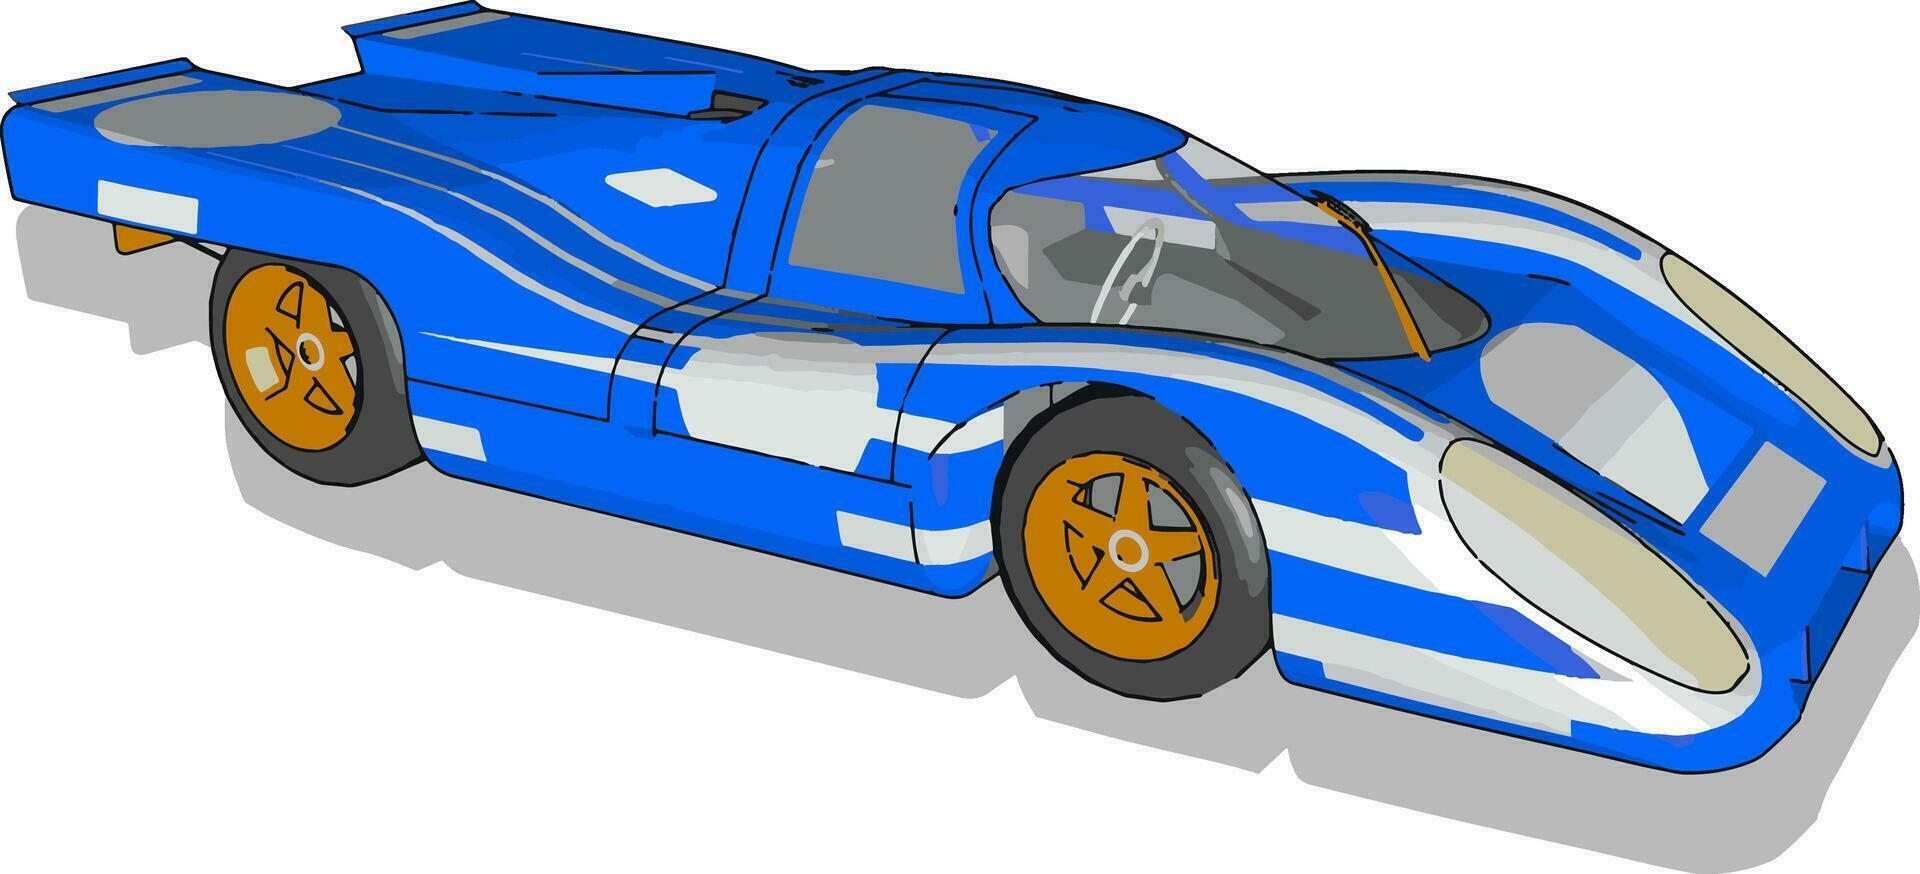 Blue racing car, illustration, vector on white background.